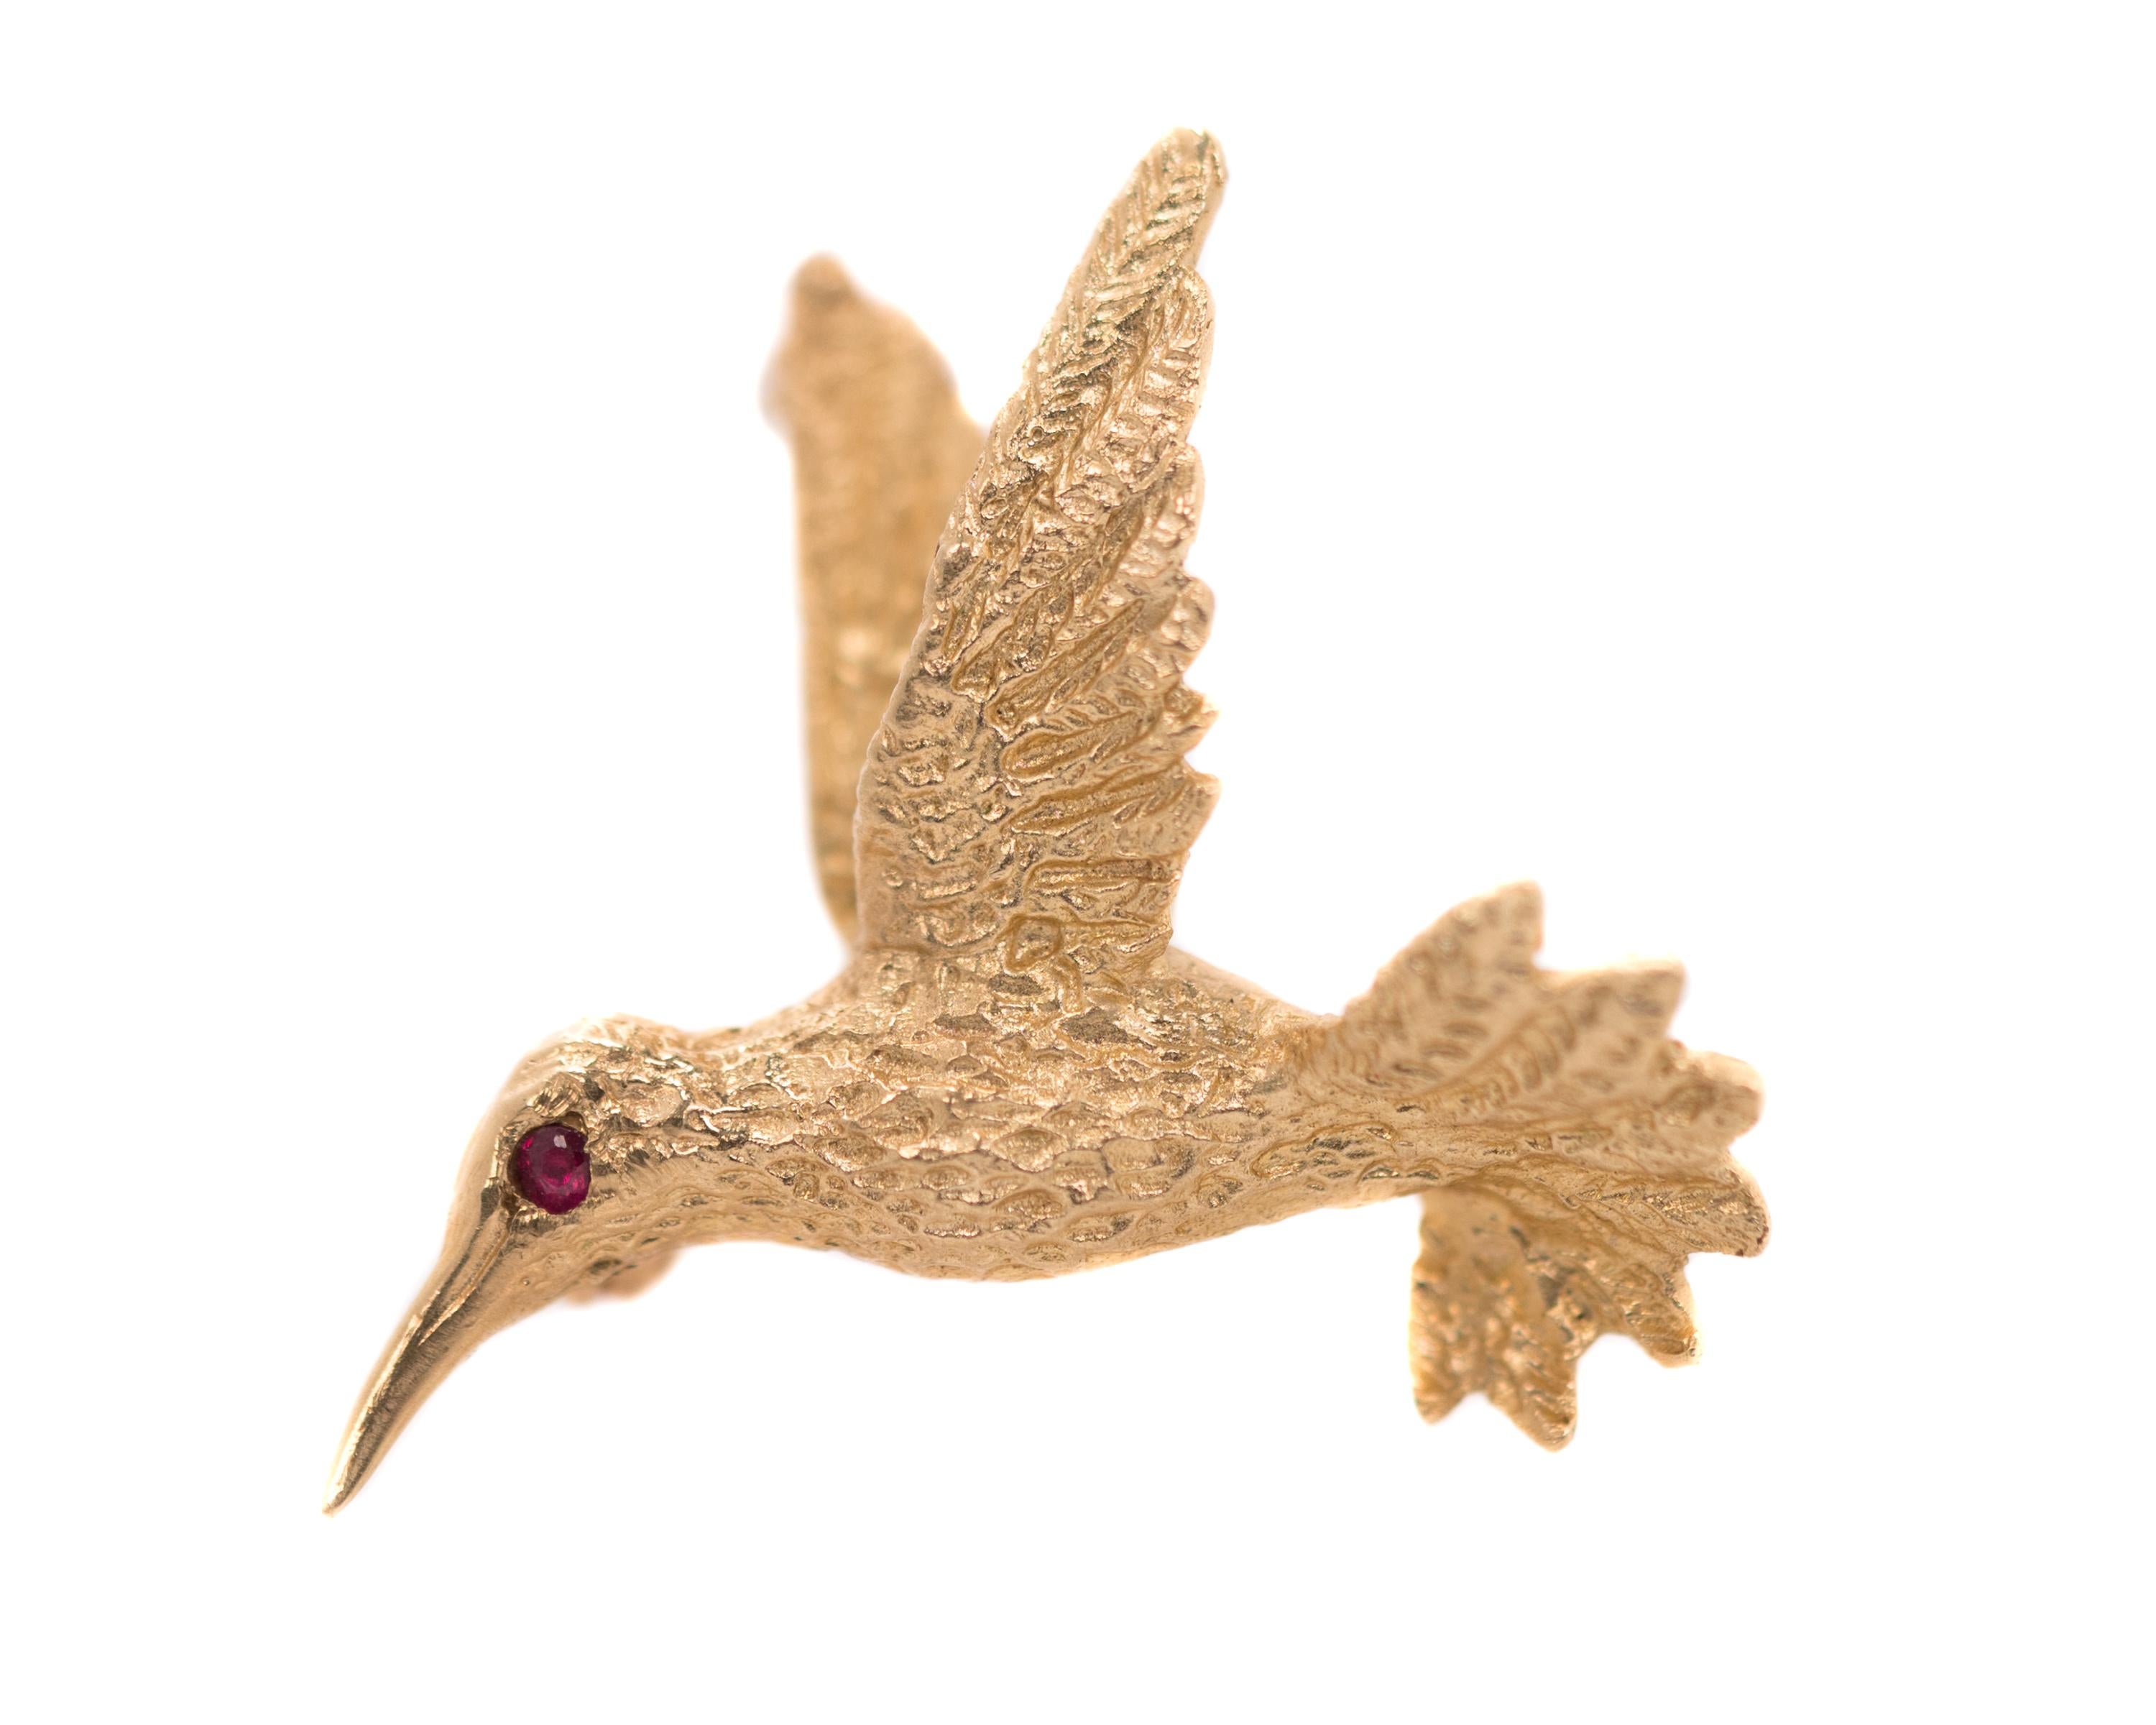 Engel Brothers Hummingbird Pin - 14 Karat Yellow Gold, Ruby

Features:
Rich, textured 14 Karat Yellow Gold
Ruby Eye
Safety Clasp
Hallmarked EB inside a Diamond shape on back of brooch
Dimensions: 27 x 24 millimeters
Depth: 11 millimeters

Brooch